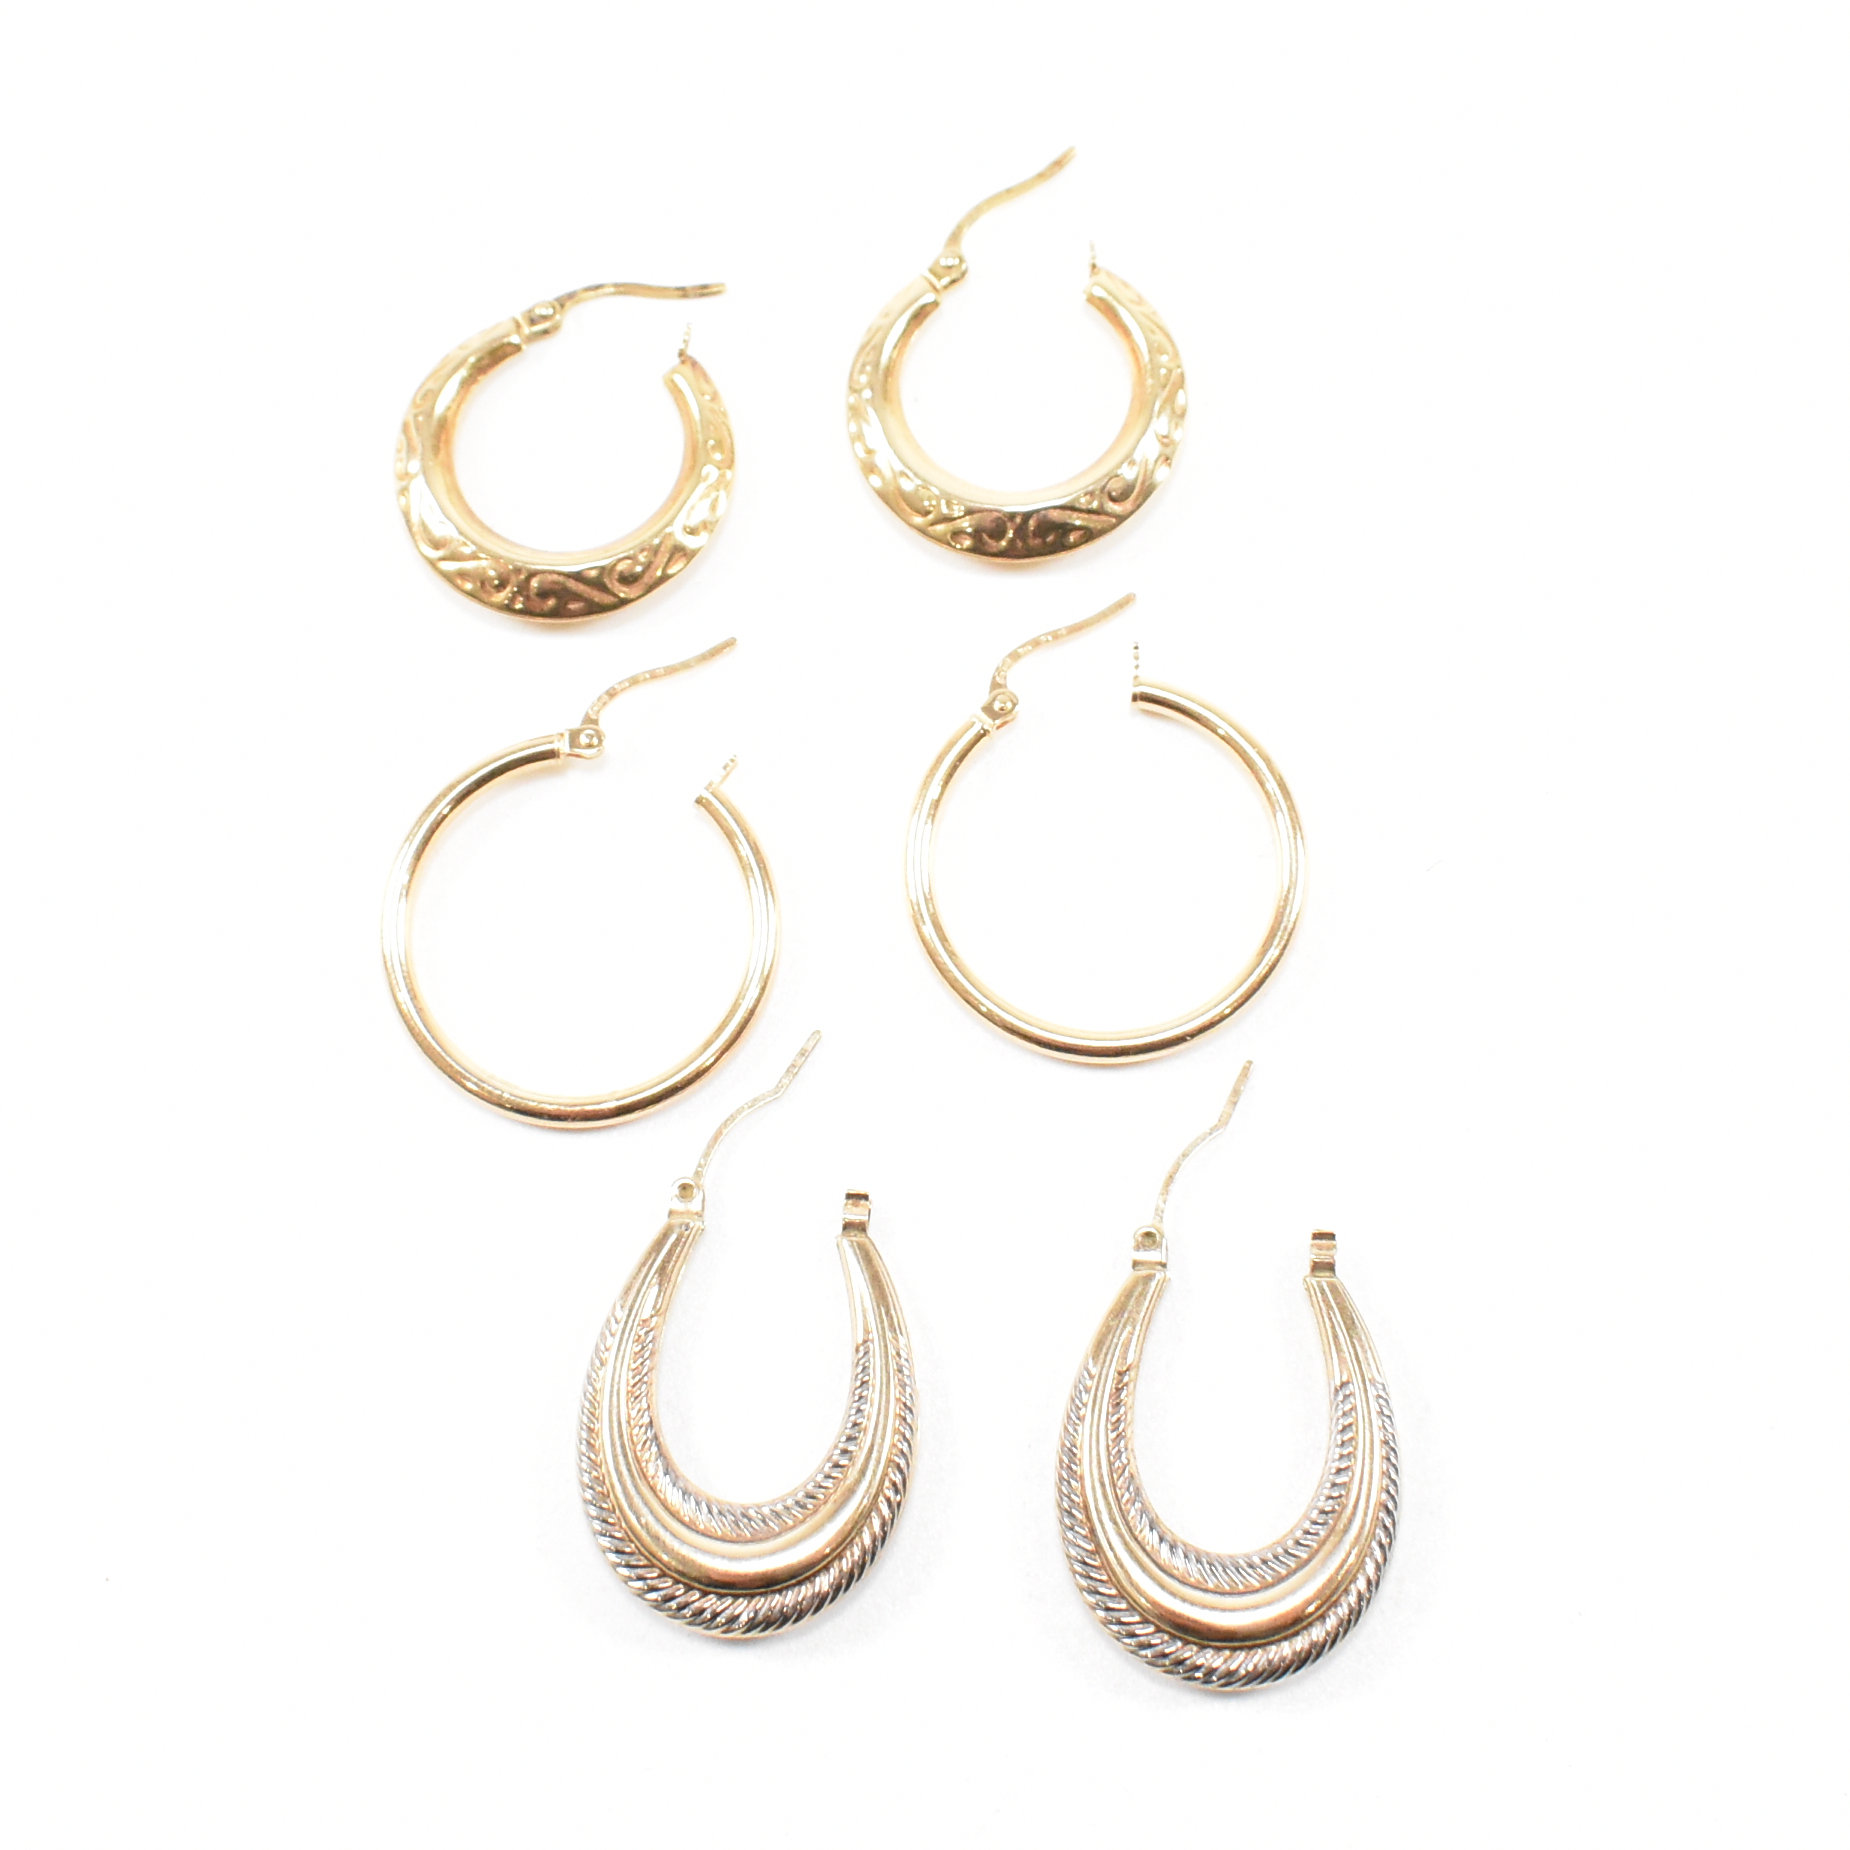 TWO PAIRS OF 9CT GOLD EARRINGS & A YELLOW & WHITE METAL PAIR - Image 2 of 7